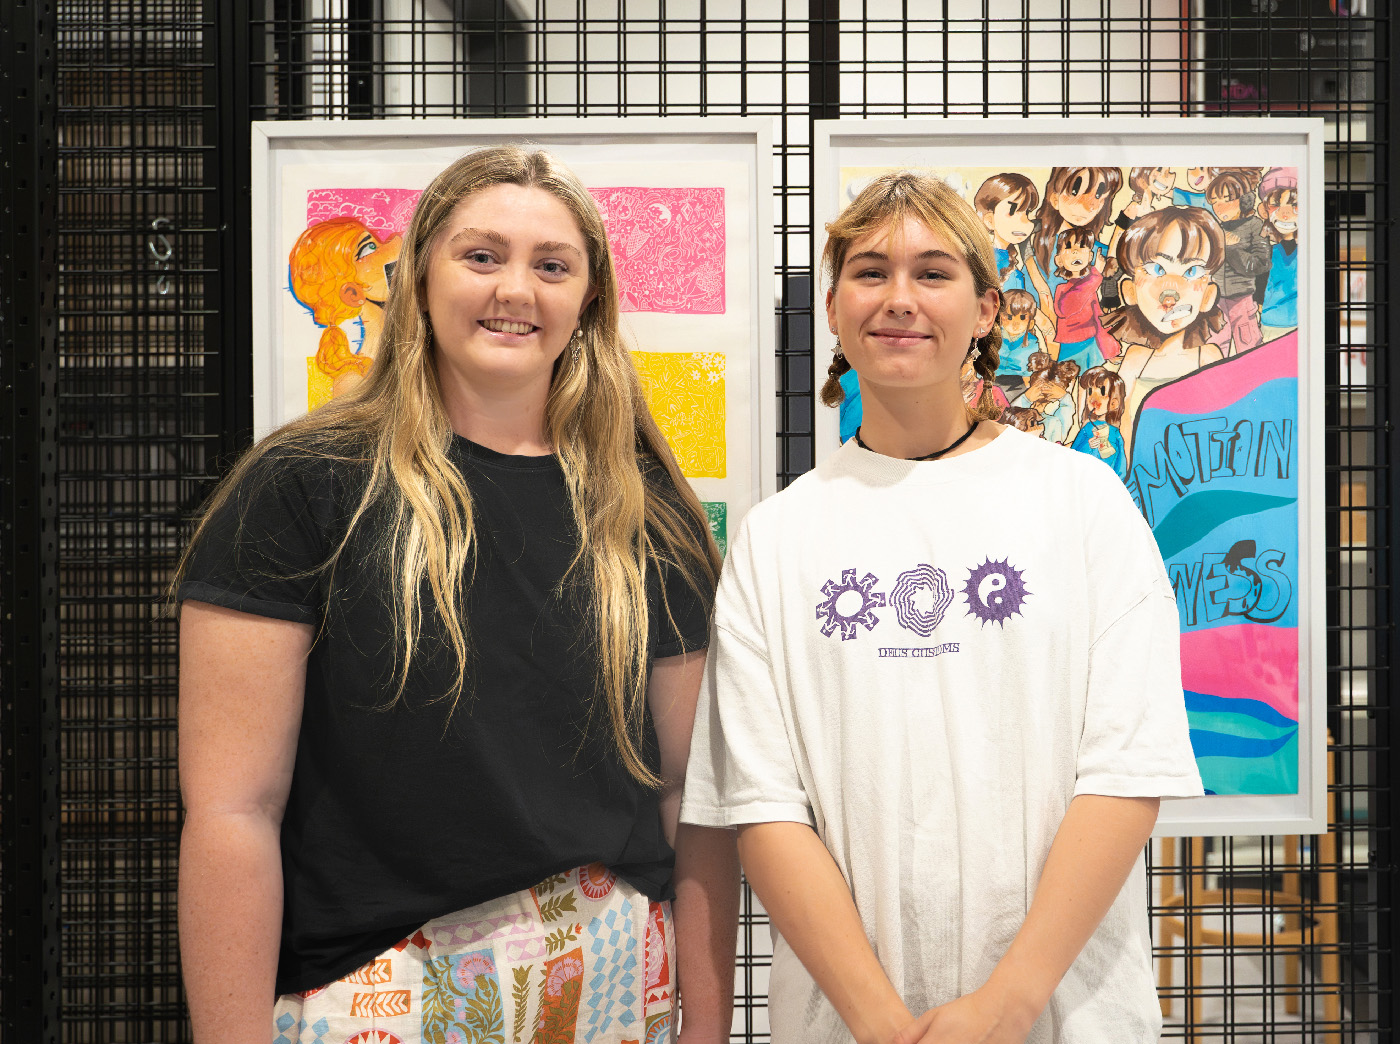 A portrait of young students Brydi Ann Custance and Indy Leet standing in front of their artwork.